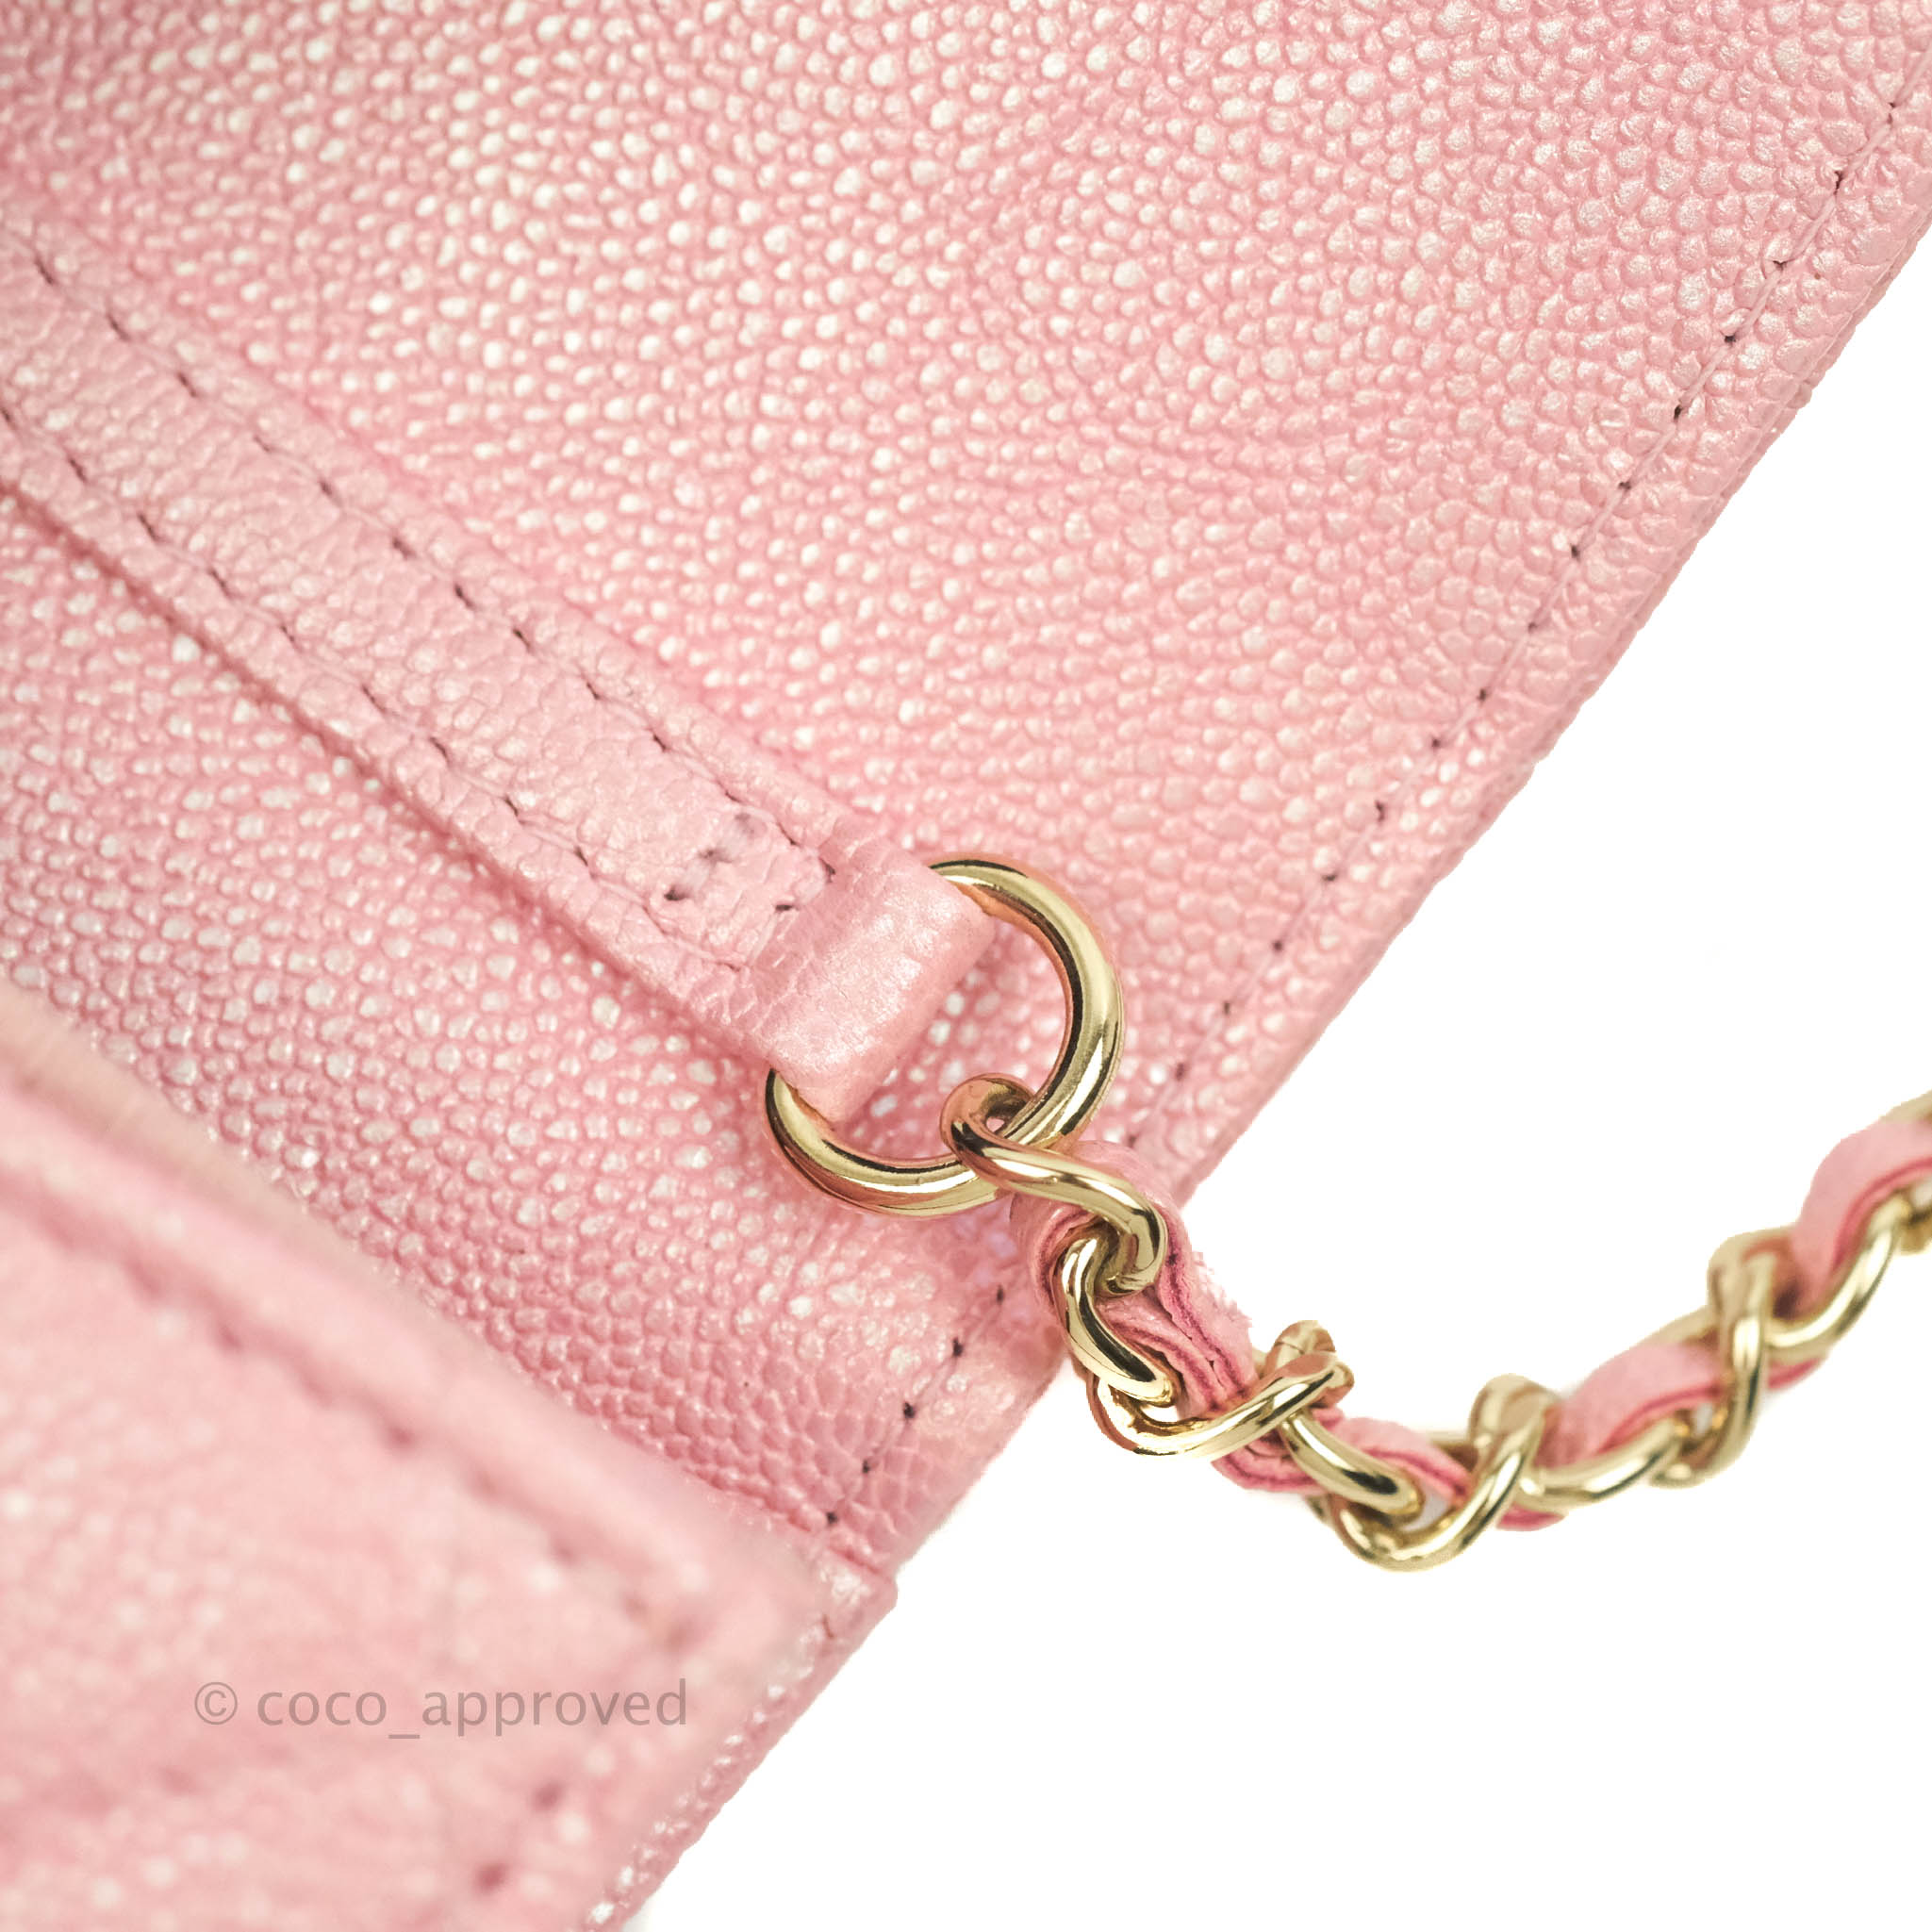 Chanel Mini Wallet With Chain Iridescent Pink Caviar Gold Hardware